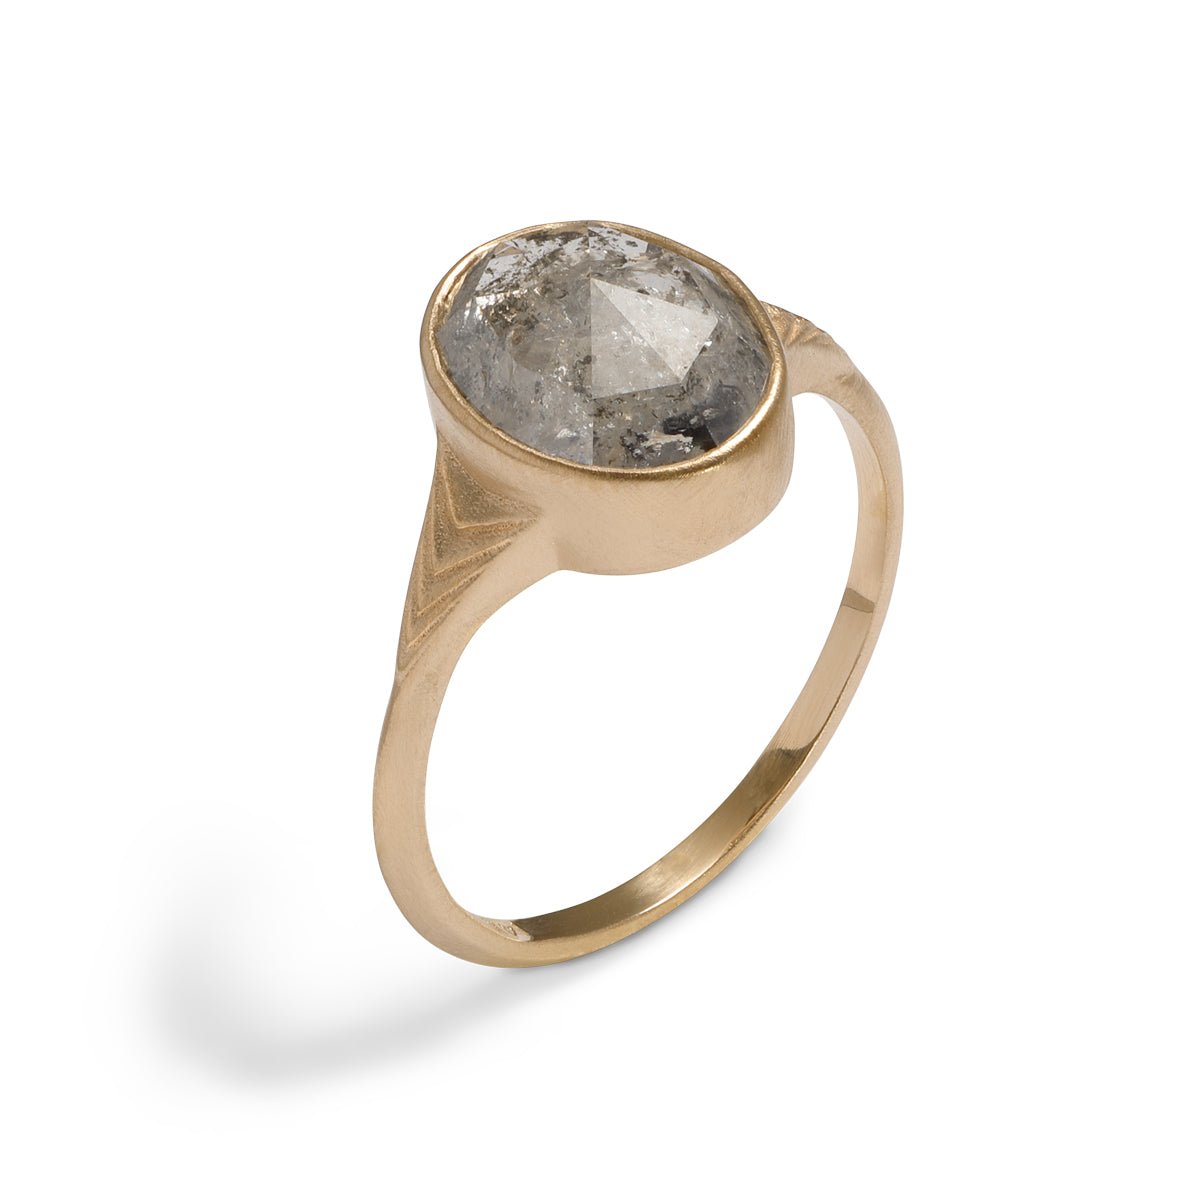 Modern oval Nubis ring with a salt & pepper diamond. 14K gold band features geometric engravings.